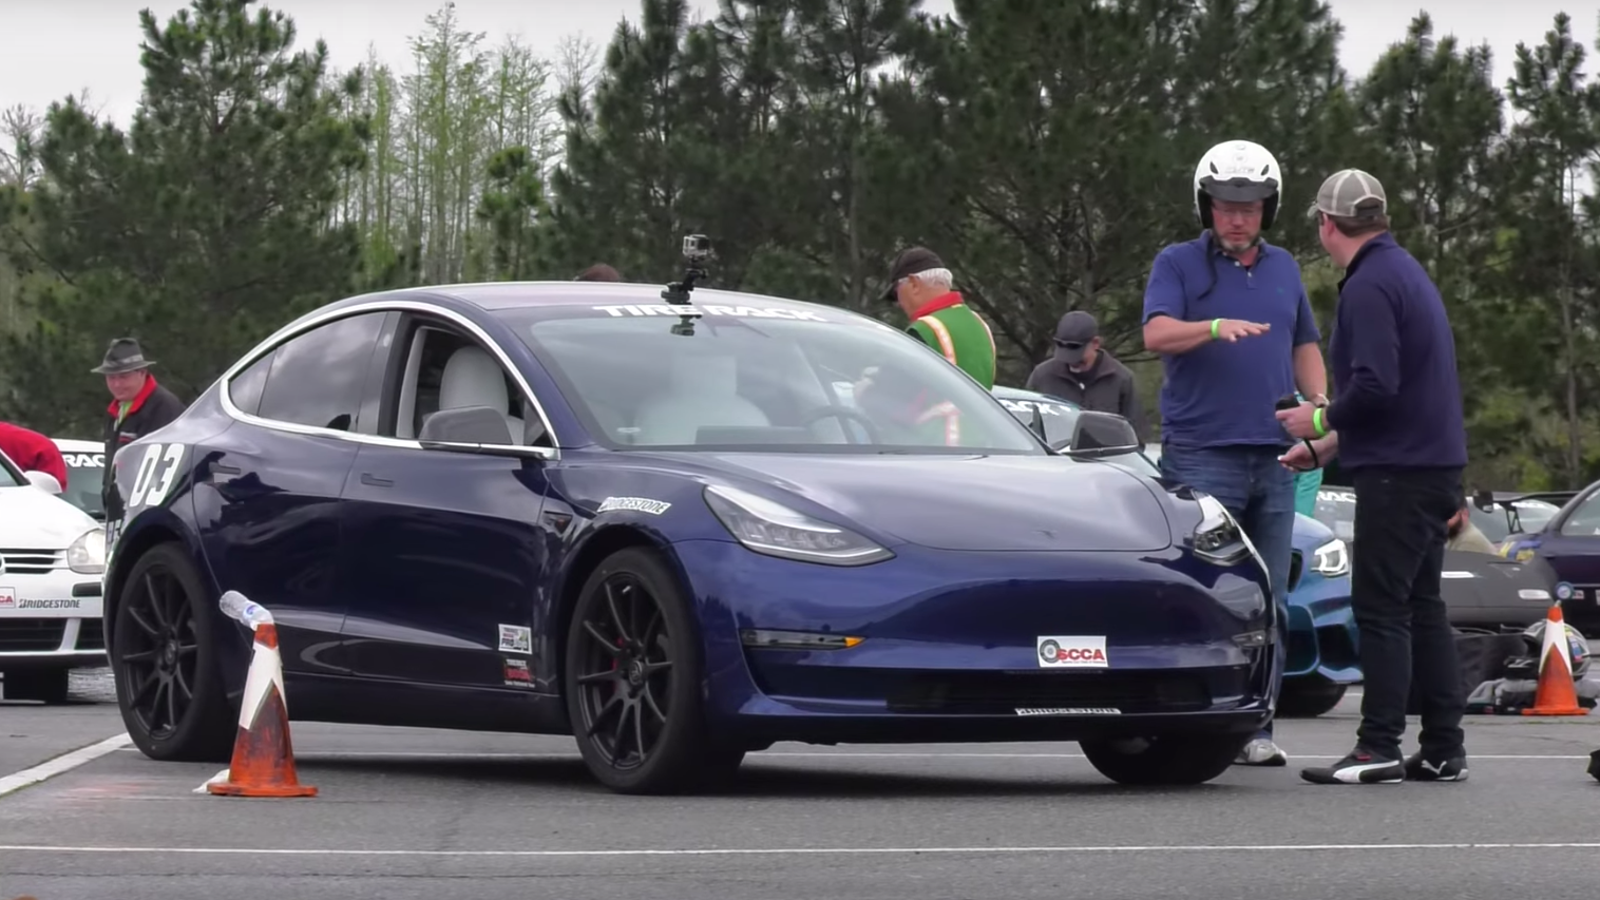 heres a good perspective on the tesla model 3 as a fun